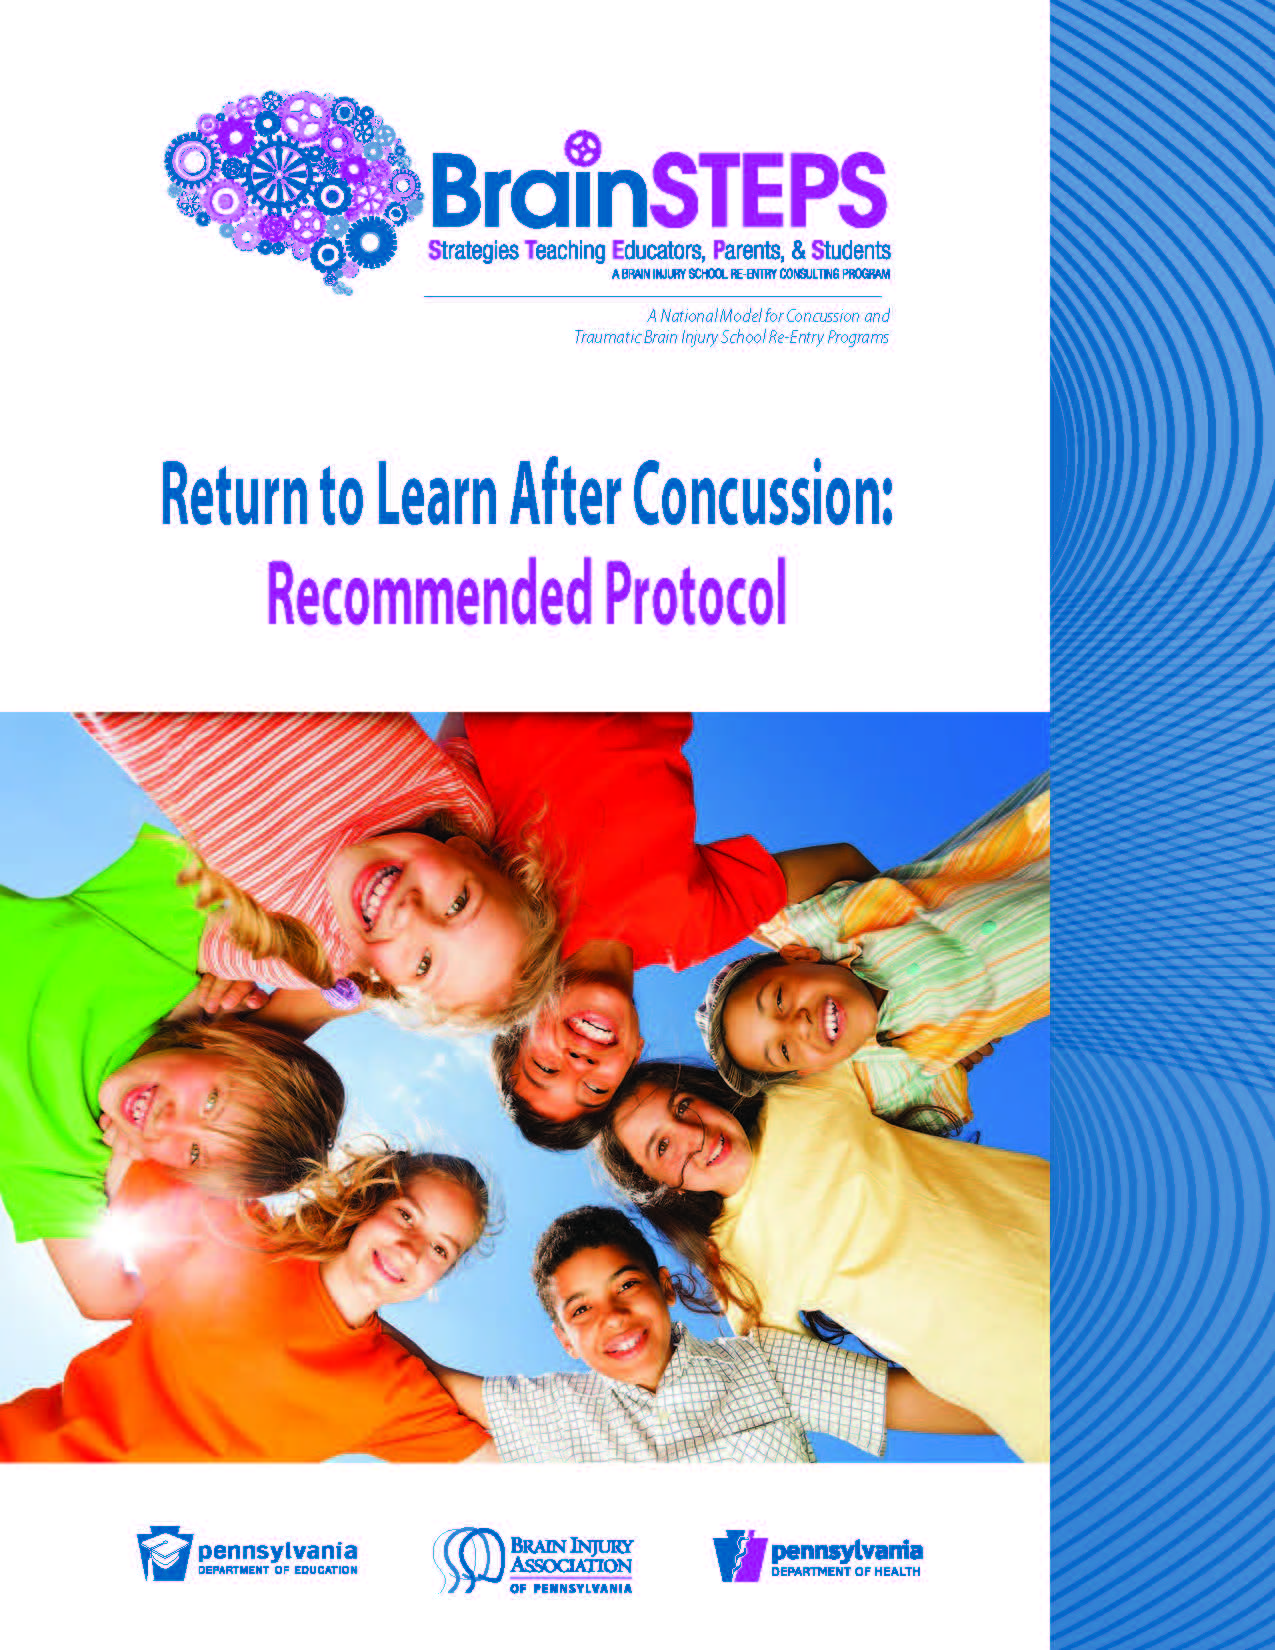 BrainSTEPS - Return to Learn After Concussion: Recommended Protocol